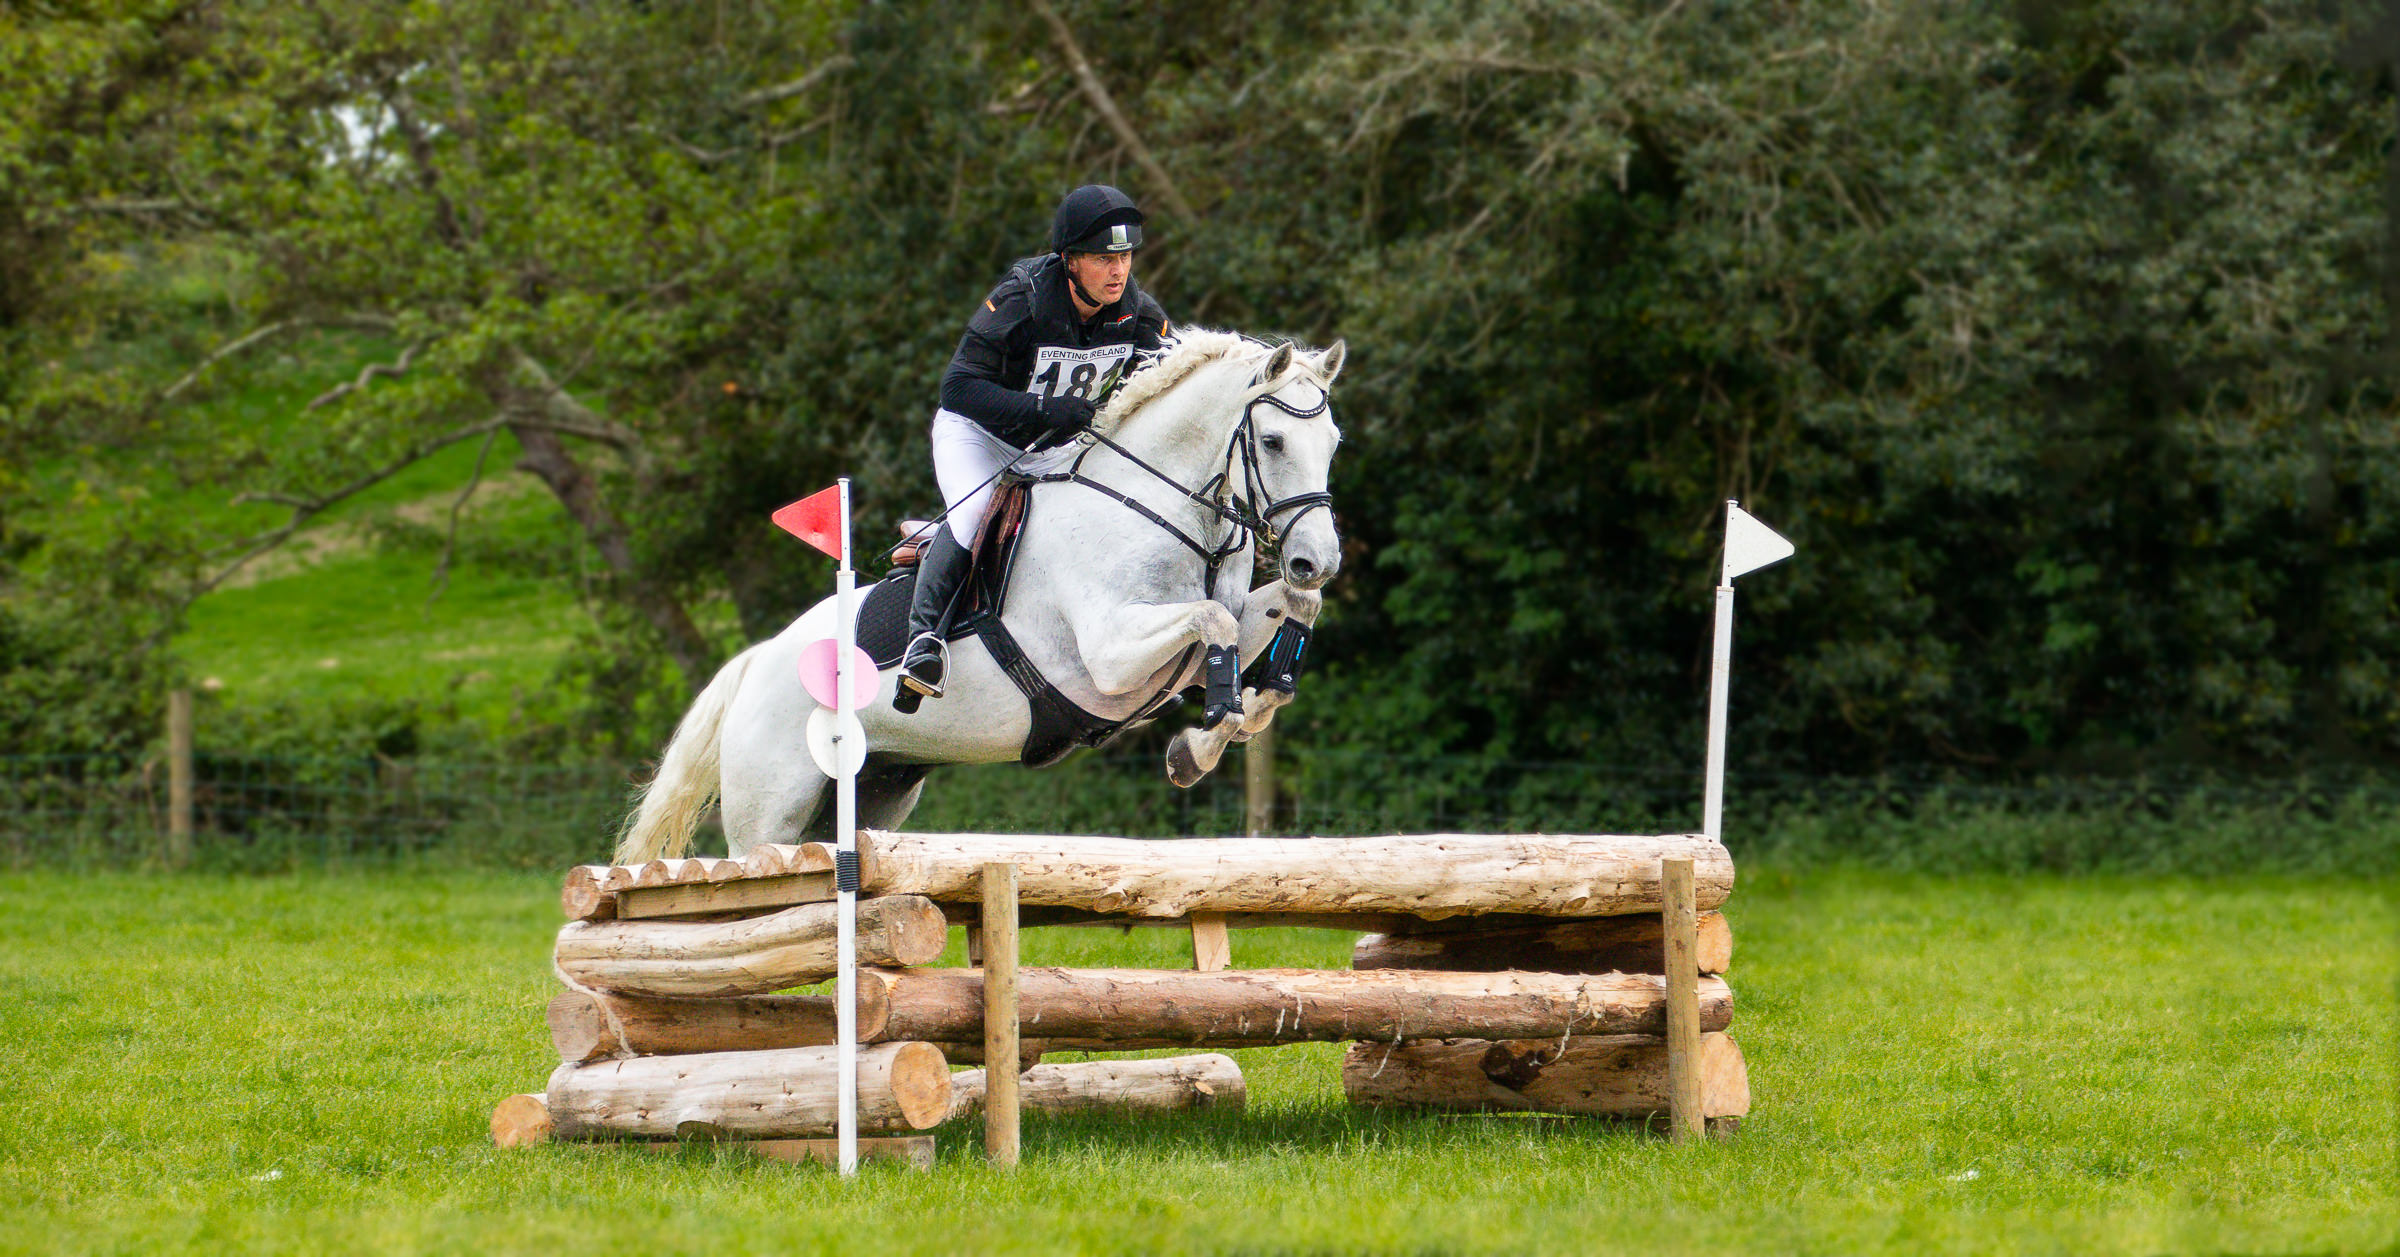 grey horse and rider photo jumping a cross country oxer